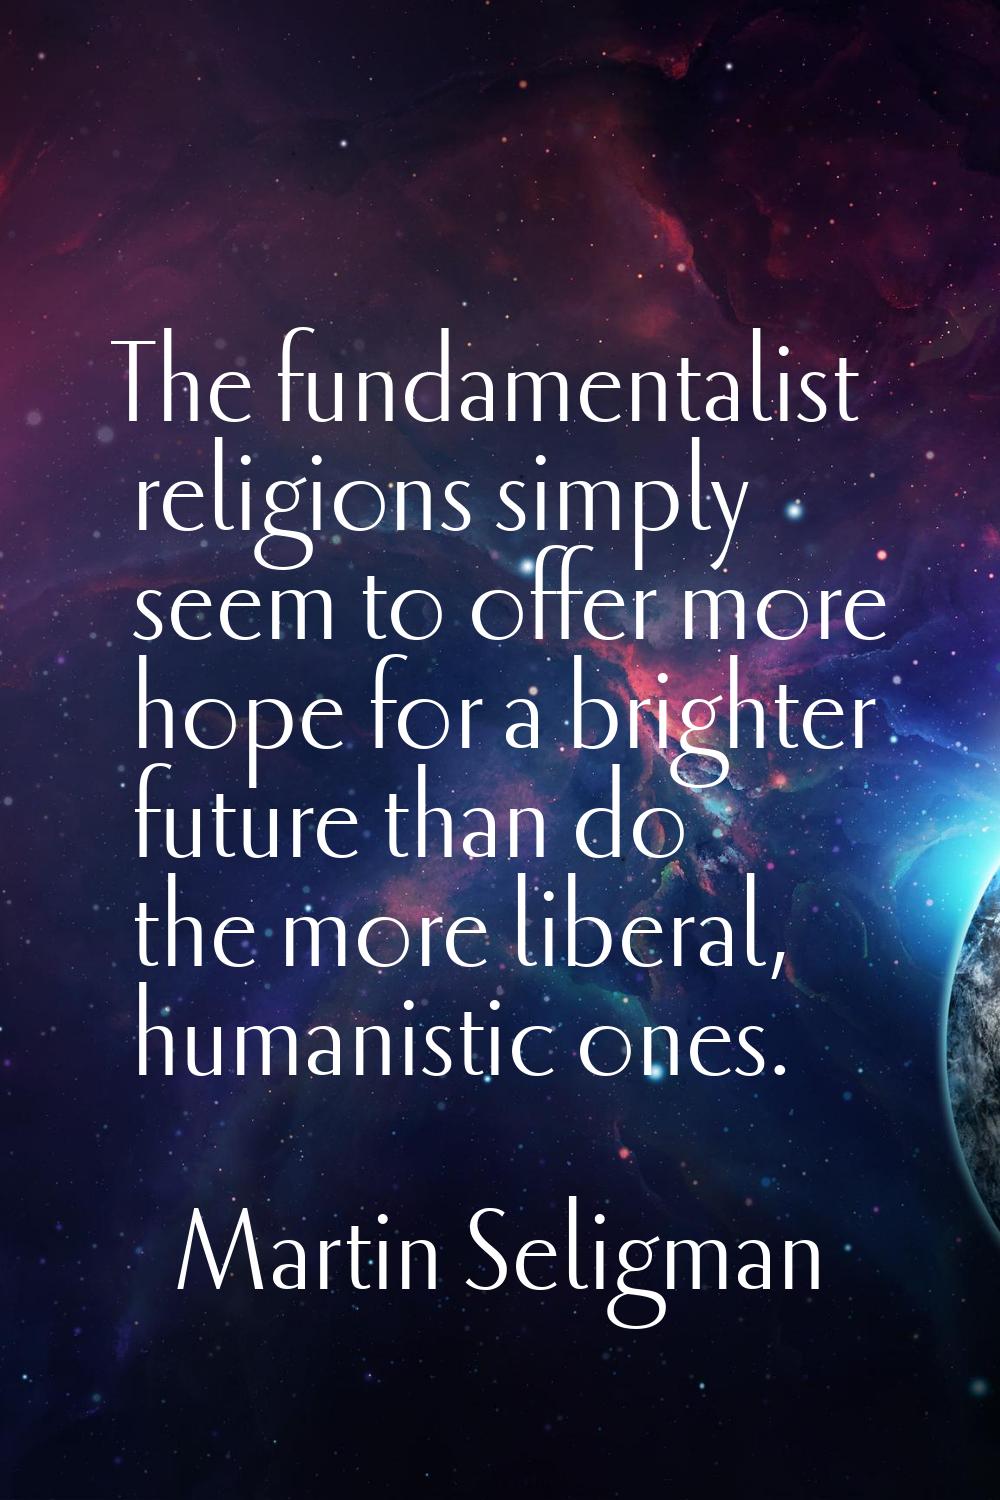 The fundamentalist religions simply seem to offer more hope for a brighter future than do the more 